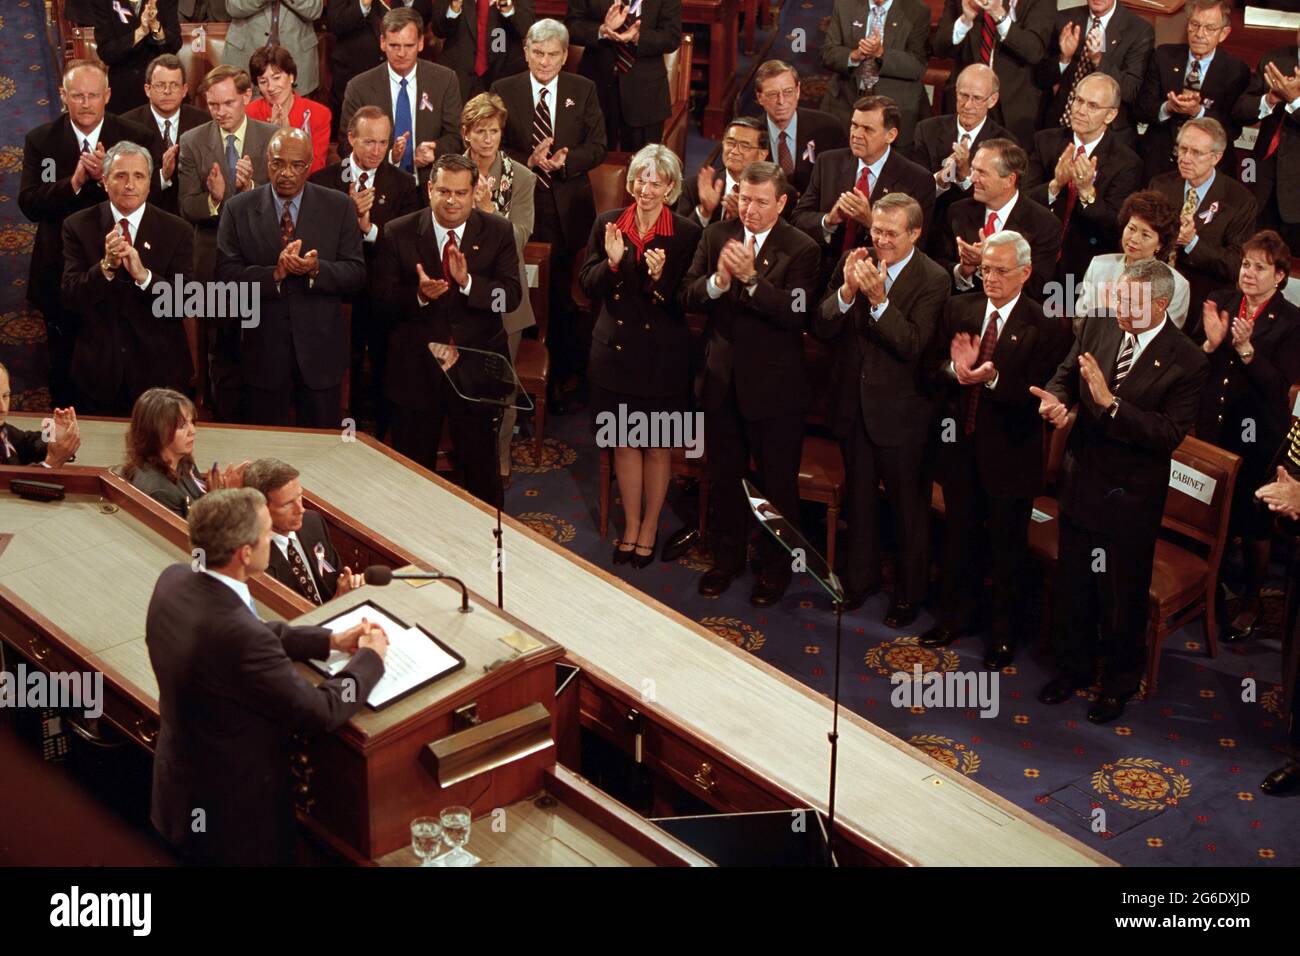 President George W. Bush delivers an address regarding the September 11 terrorist attacks on the United States to a joint session of Congress Thursday, Sept. 20, 2001, at the U.S. Capitol.  Photo by Paul Morse, Courtesy of the George W. Bush Presidential Library Stock Photo